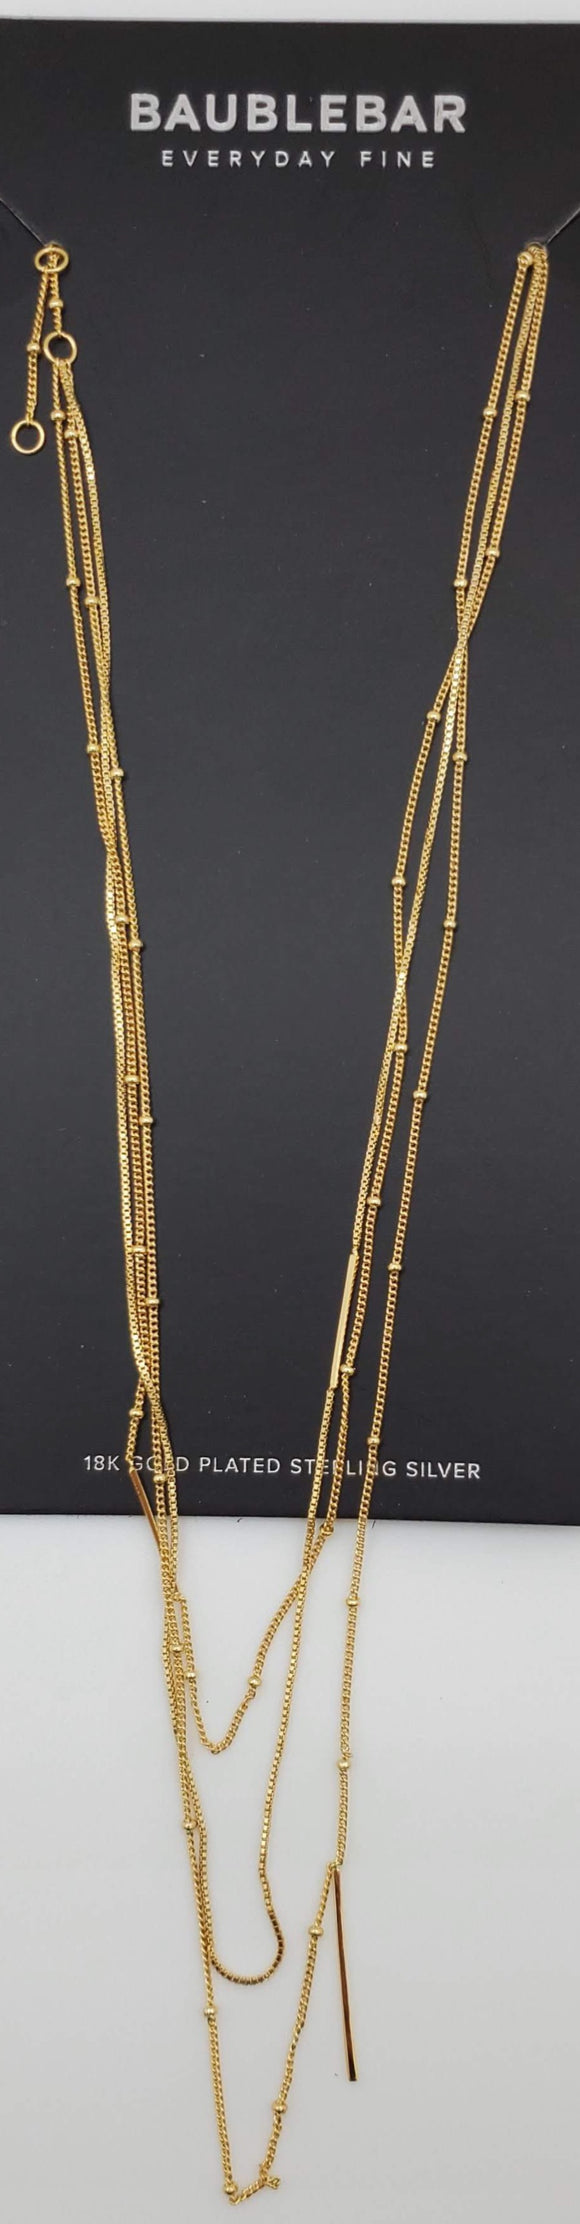 Baublebar Thin Gold Necklace